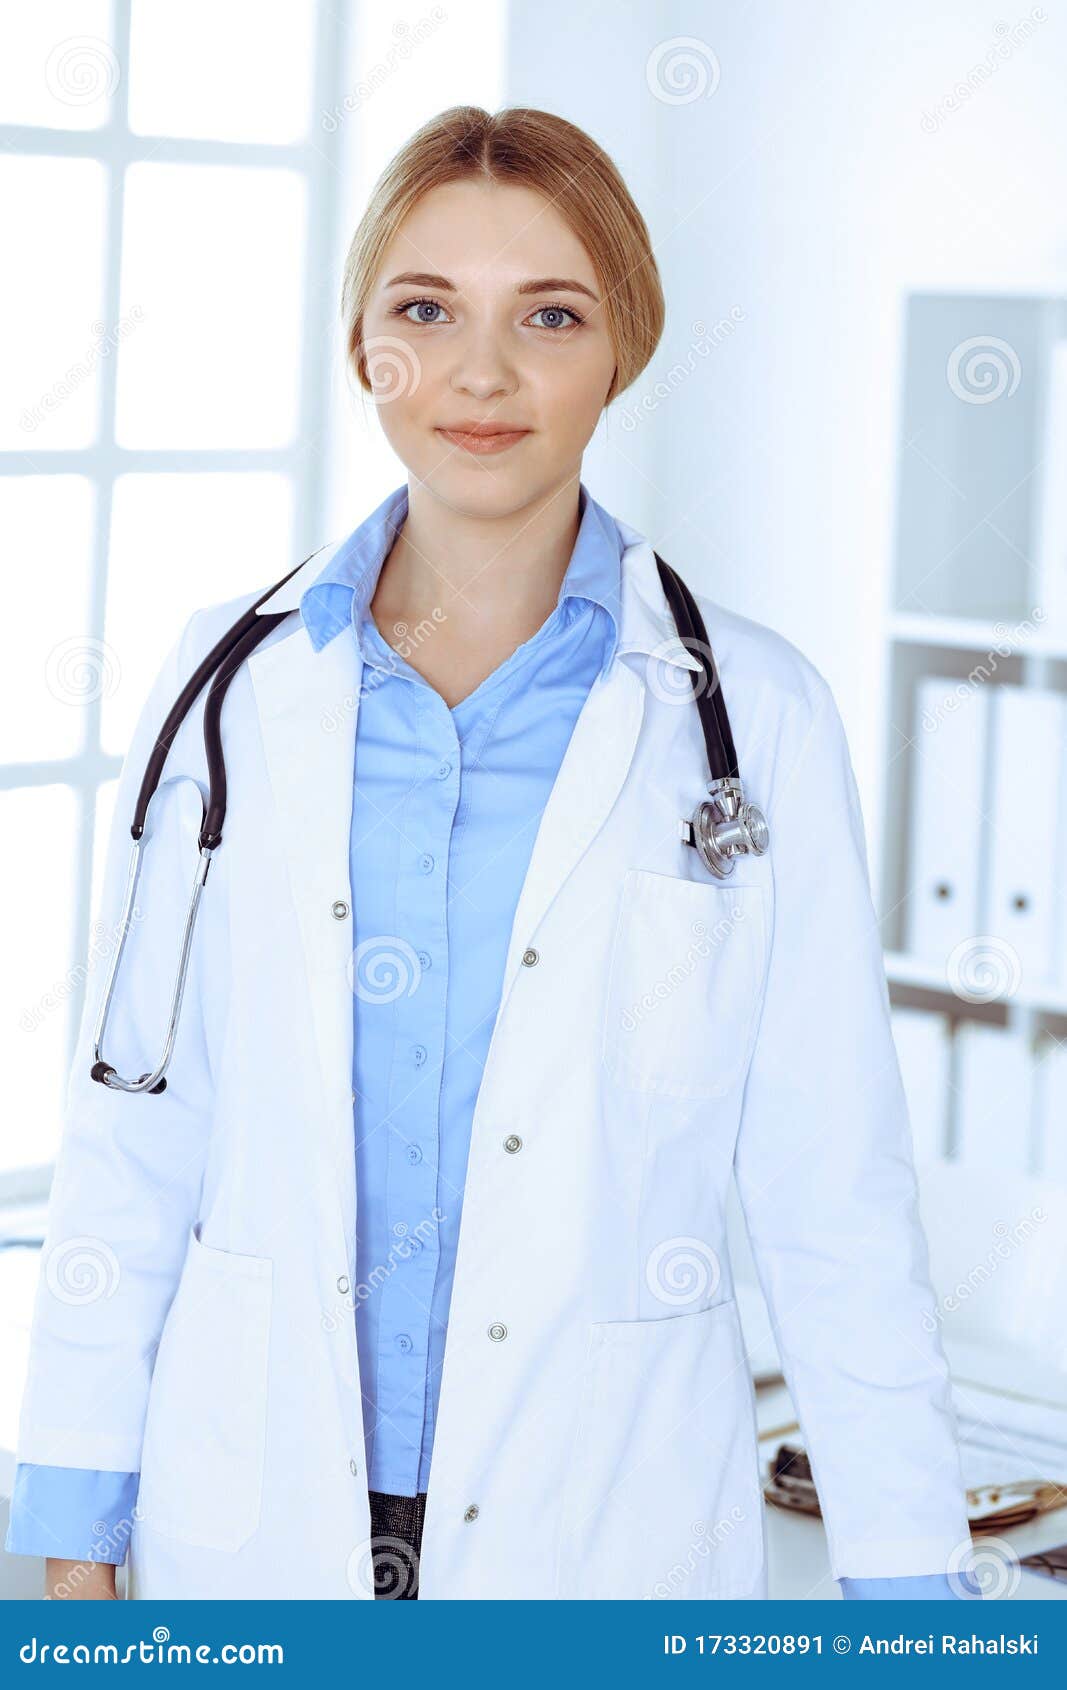 Young Woman Doctor at Work in Hospital Looking at Camera. Blue Colored ...